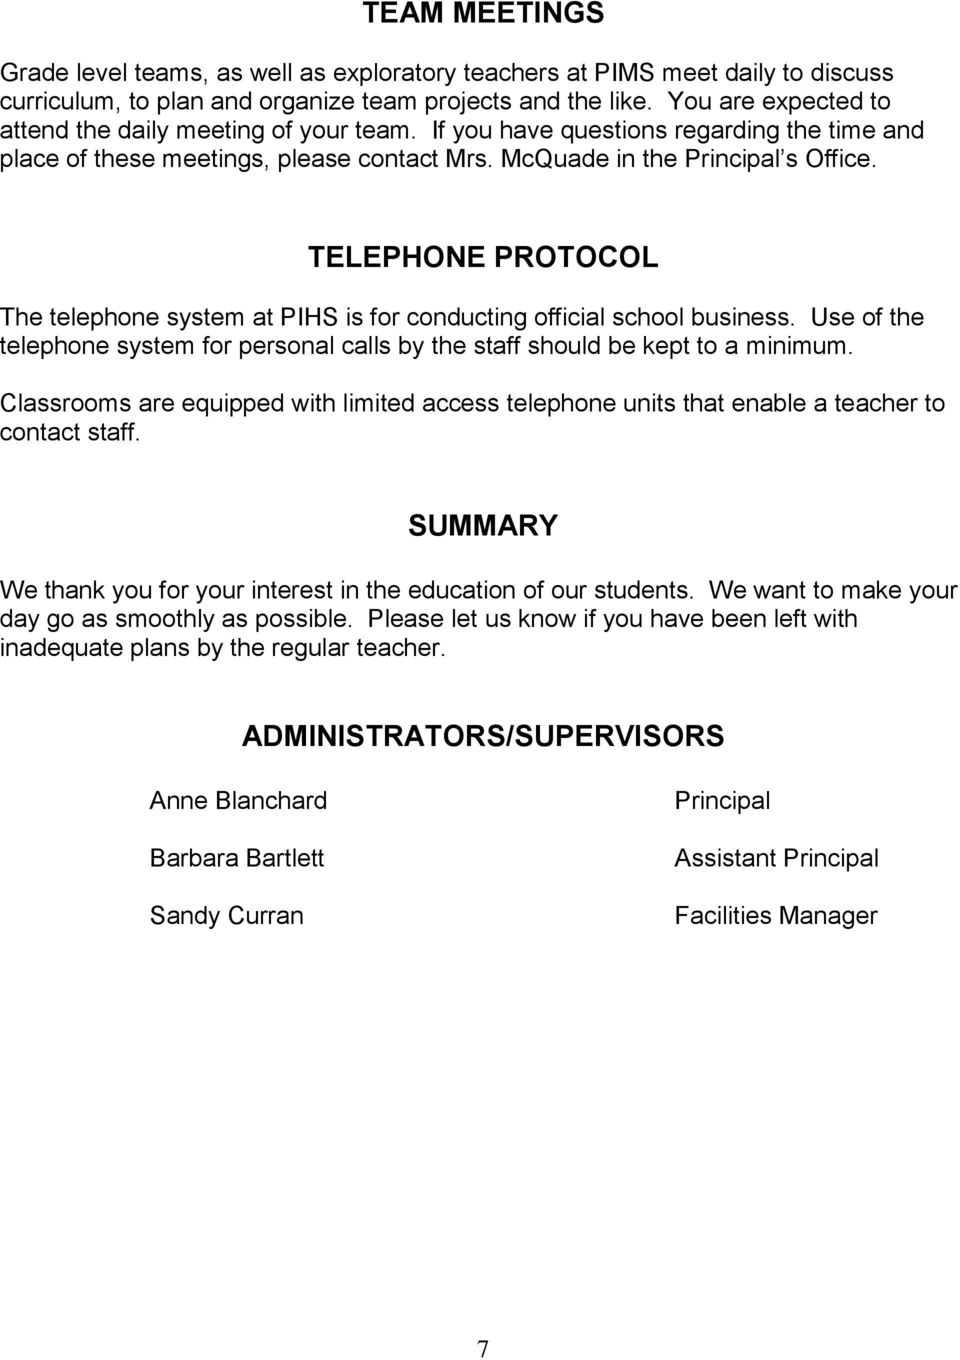 TELEPHONE PROTOCOL The telephone system at PIHS is for conducting official school business. Use of the telephone system for personal calls by the staff should be kept to a minimum.